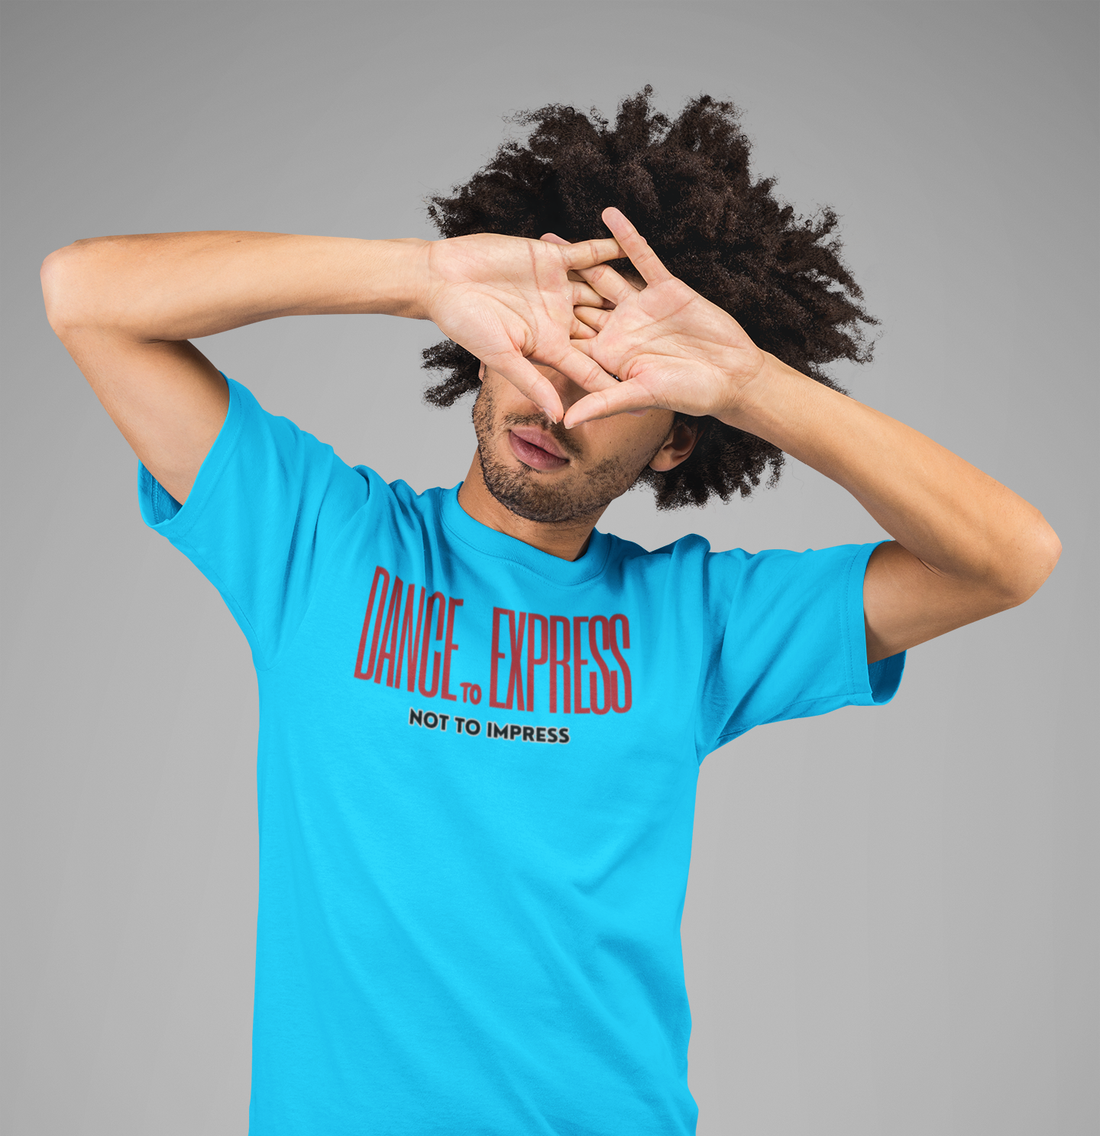 A male wearing a light blue T-shirt with the text "dance to express not to impress"